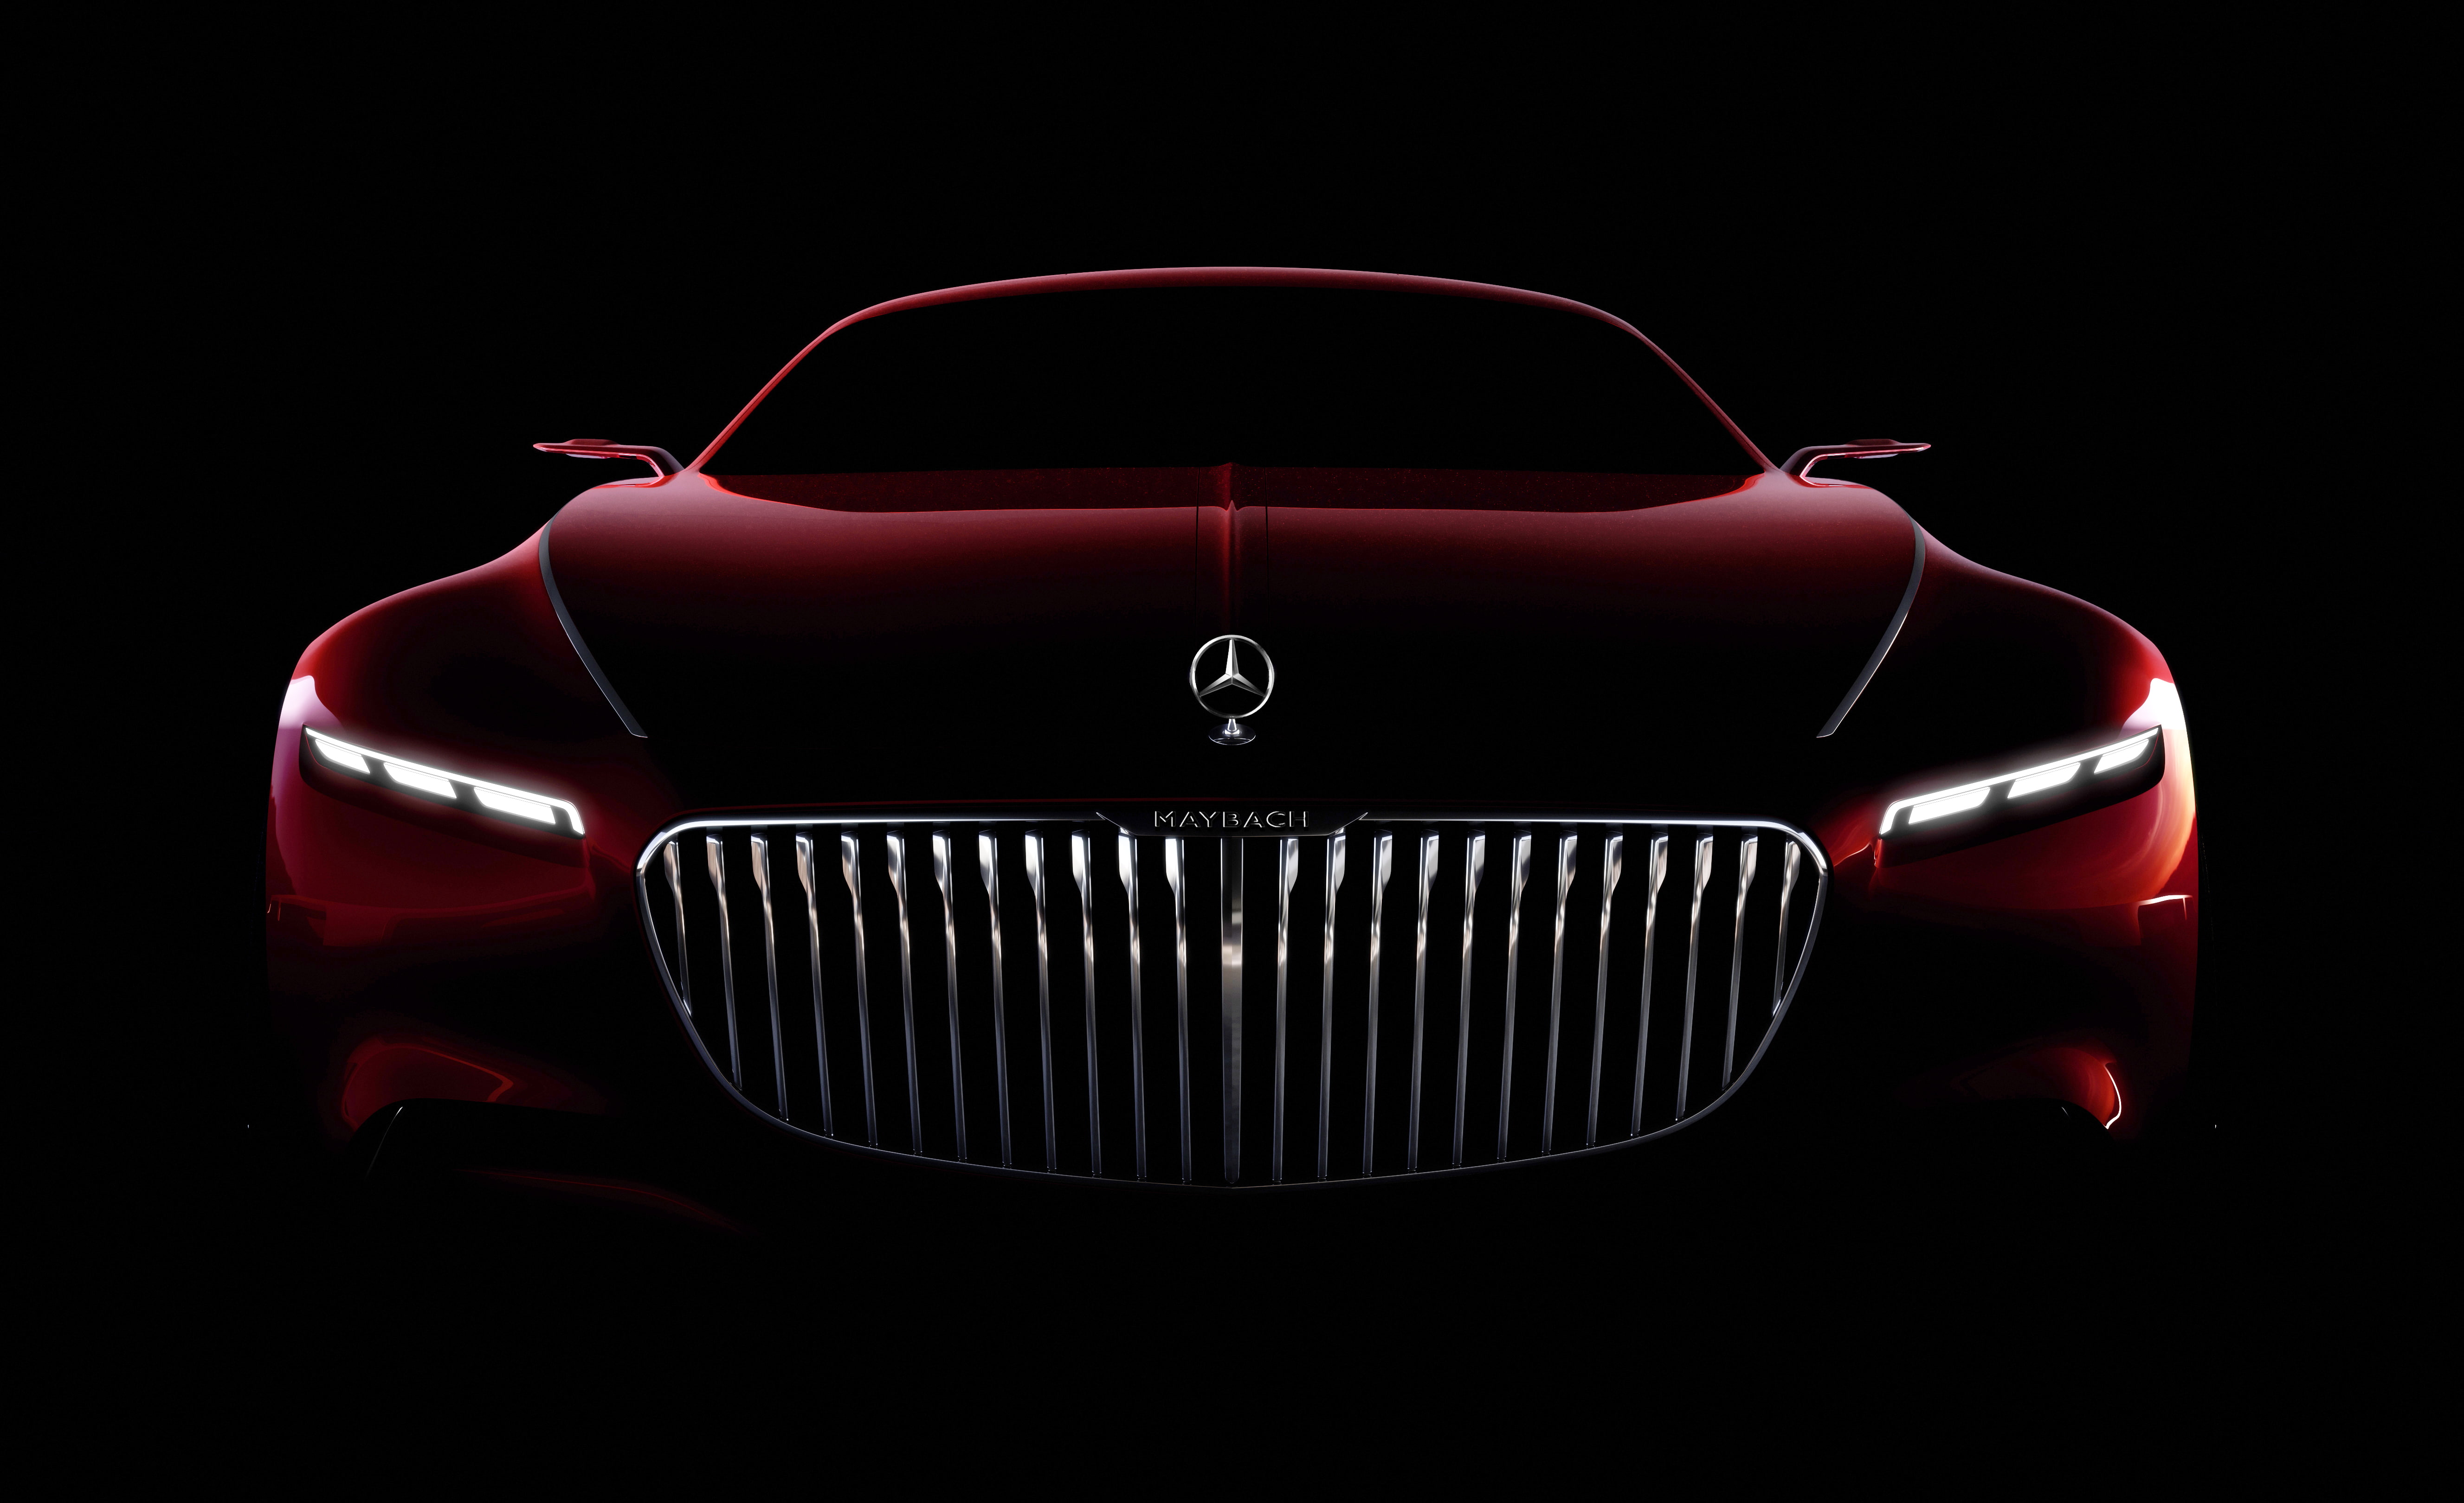 Vision Mercedes-Maybach 6, 5K, Concept Cars, black background